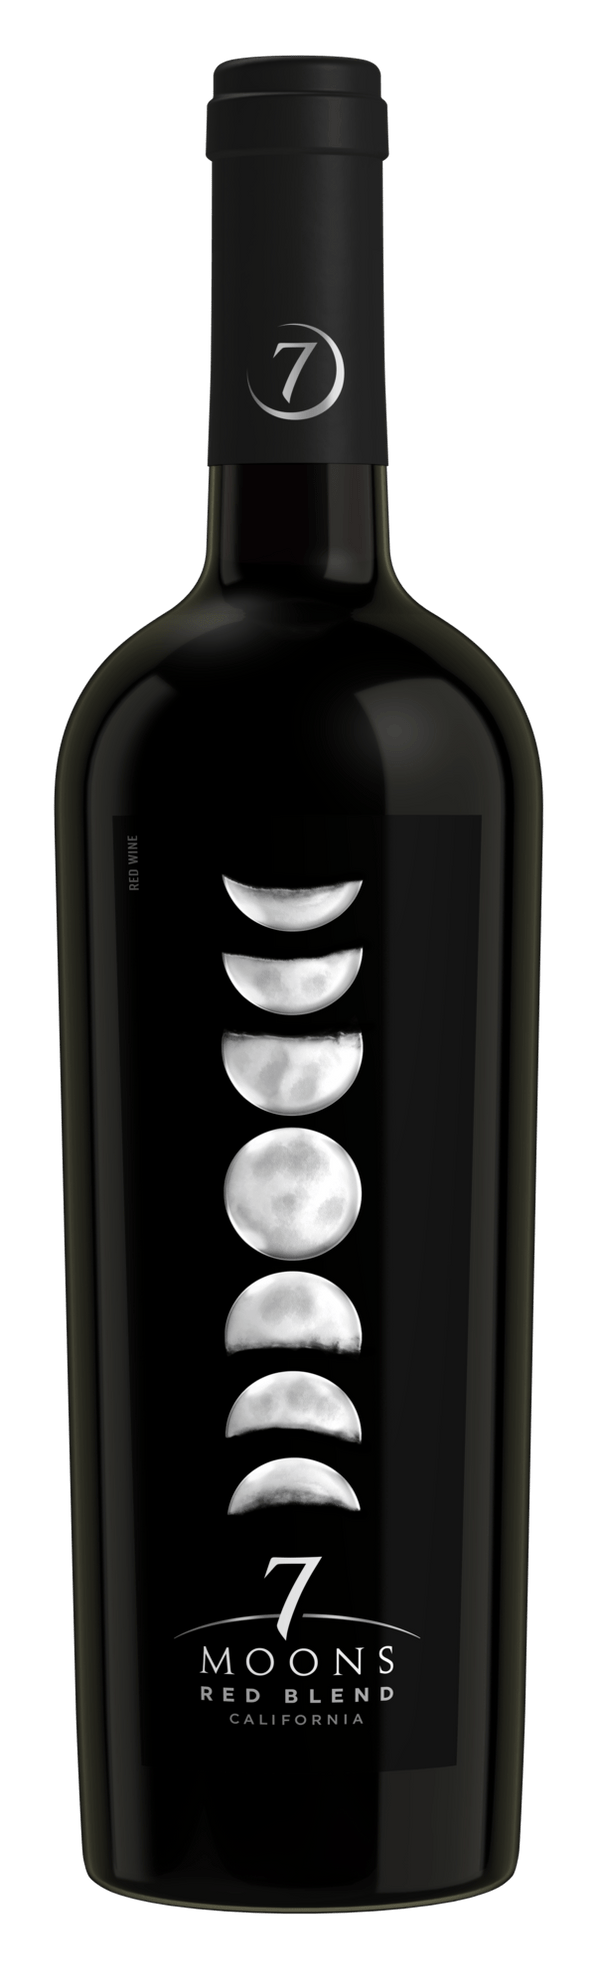 7 MOONS RED BLEND 750ML